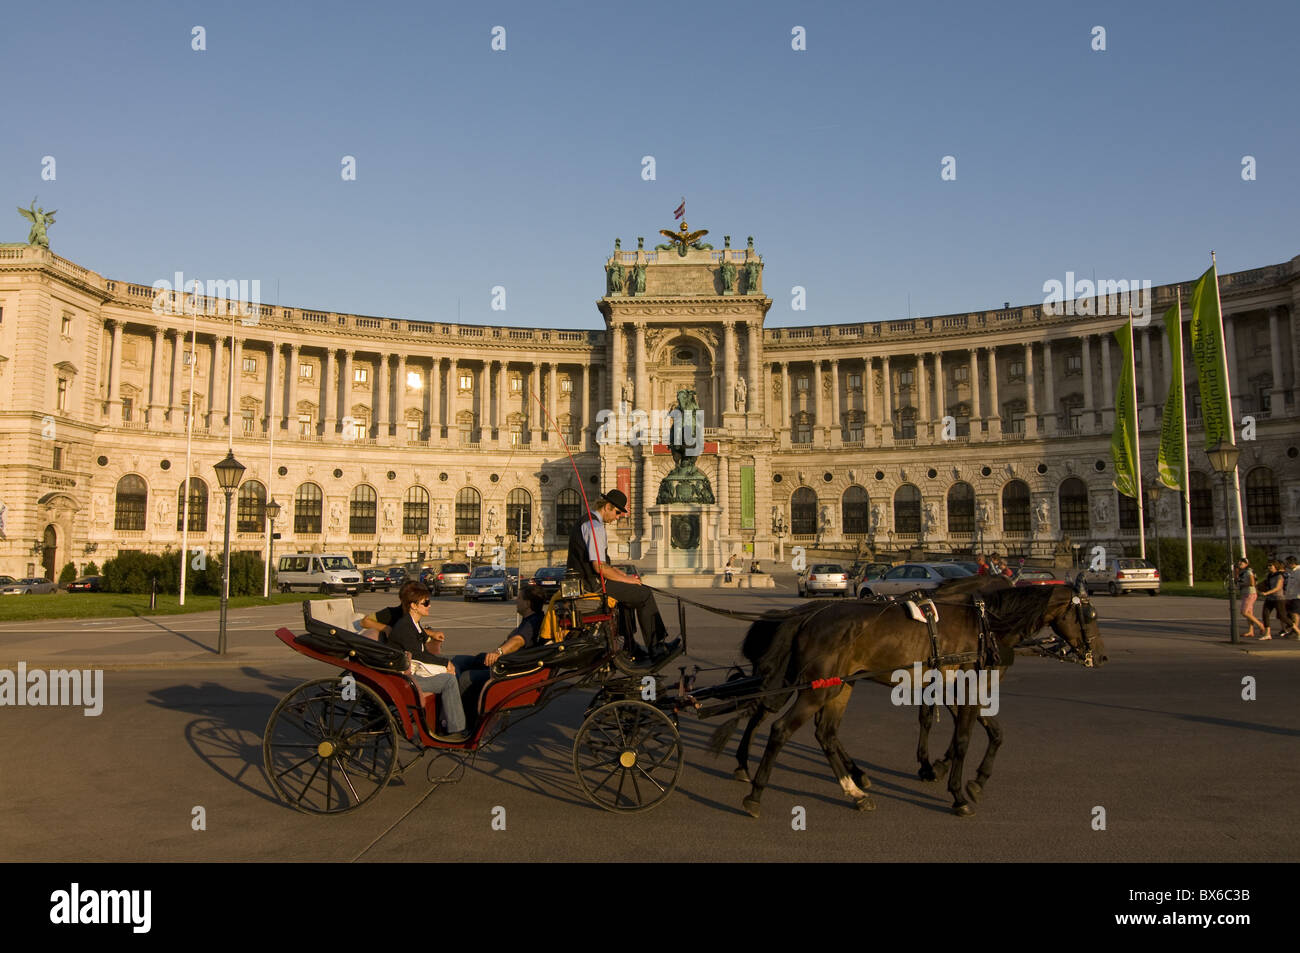 Horse cart in front of the Hofburg Palace on the Heldenplatz, Vienna, Austria, Europe Stock Photo